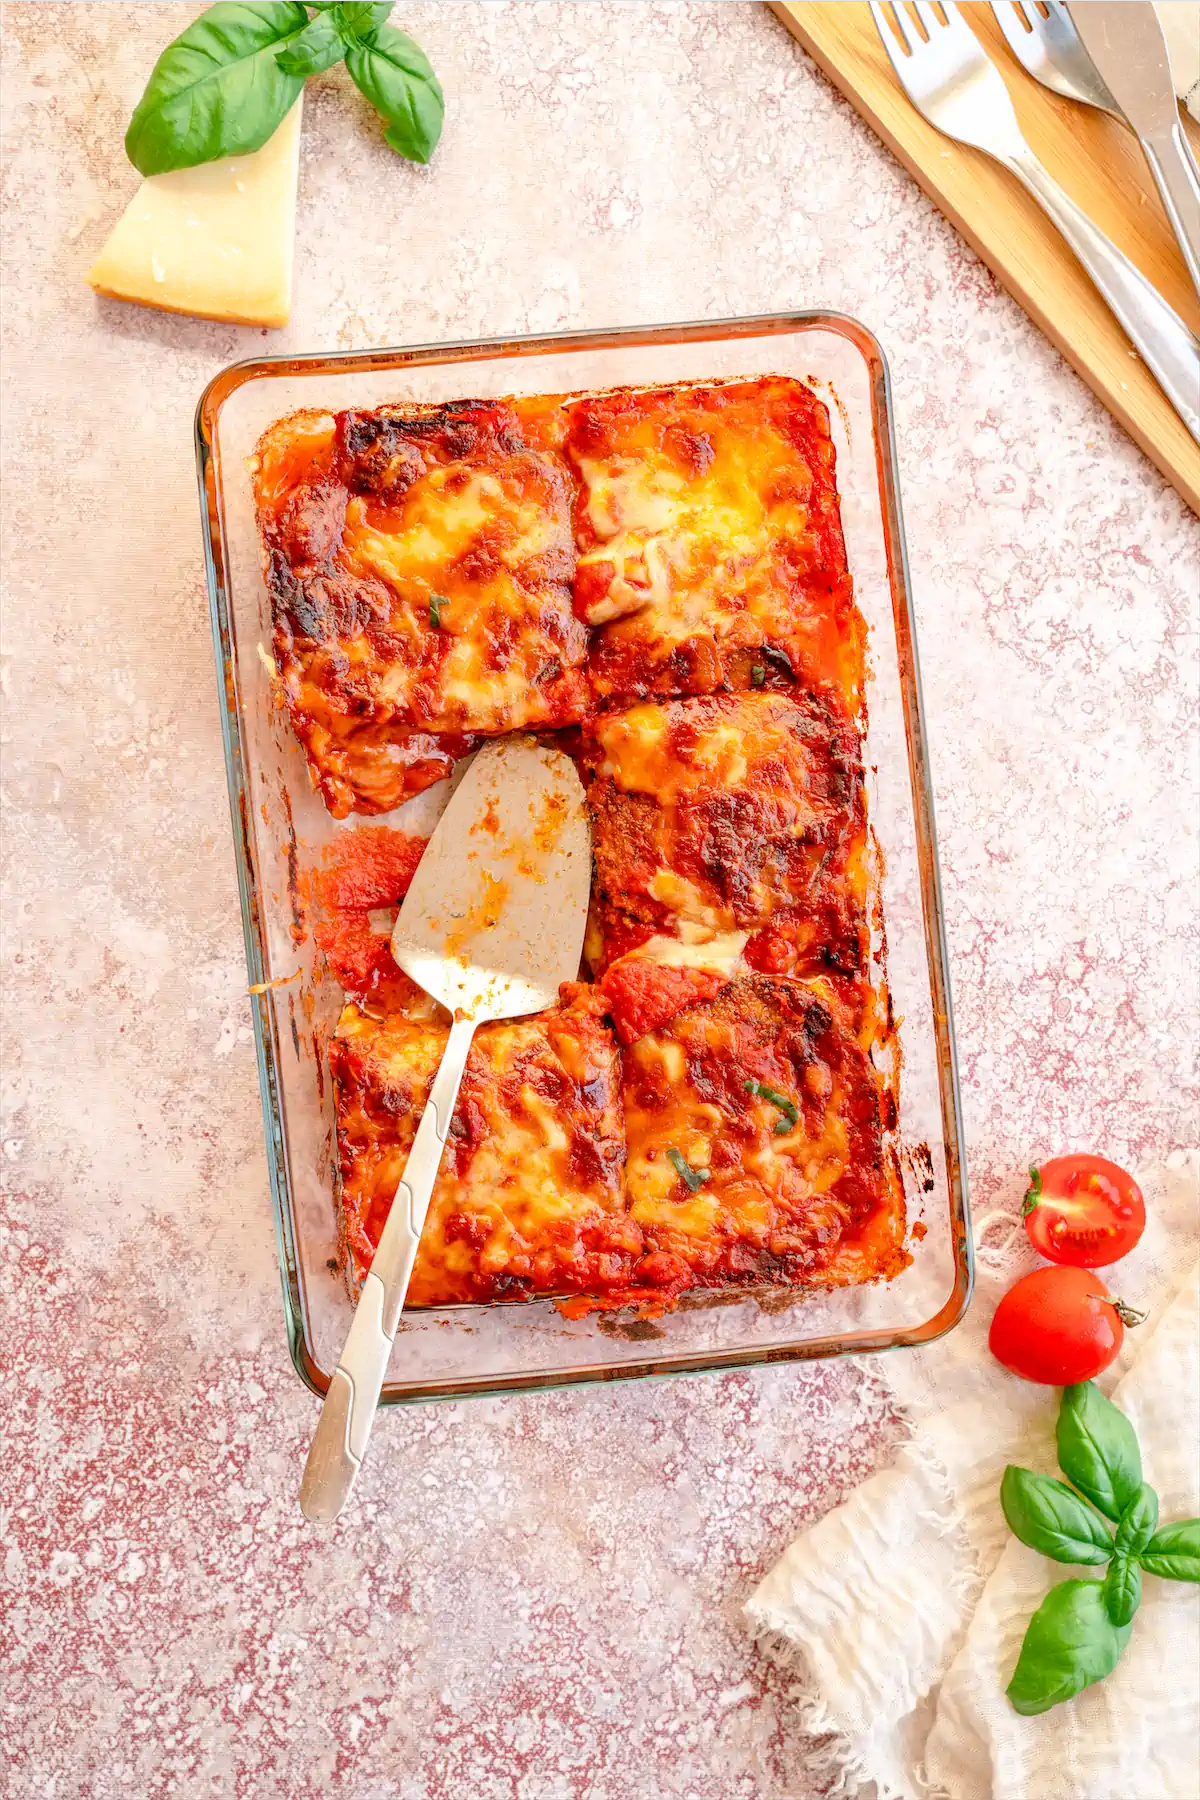 Low carb cheesy parmesan and eggplant recipe.